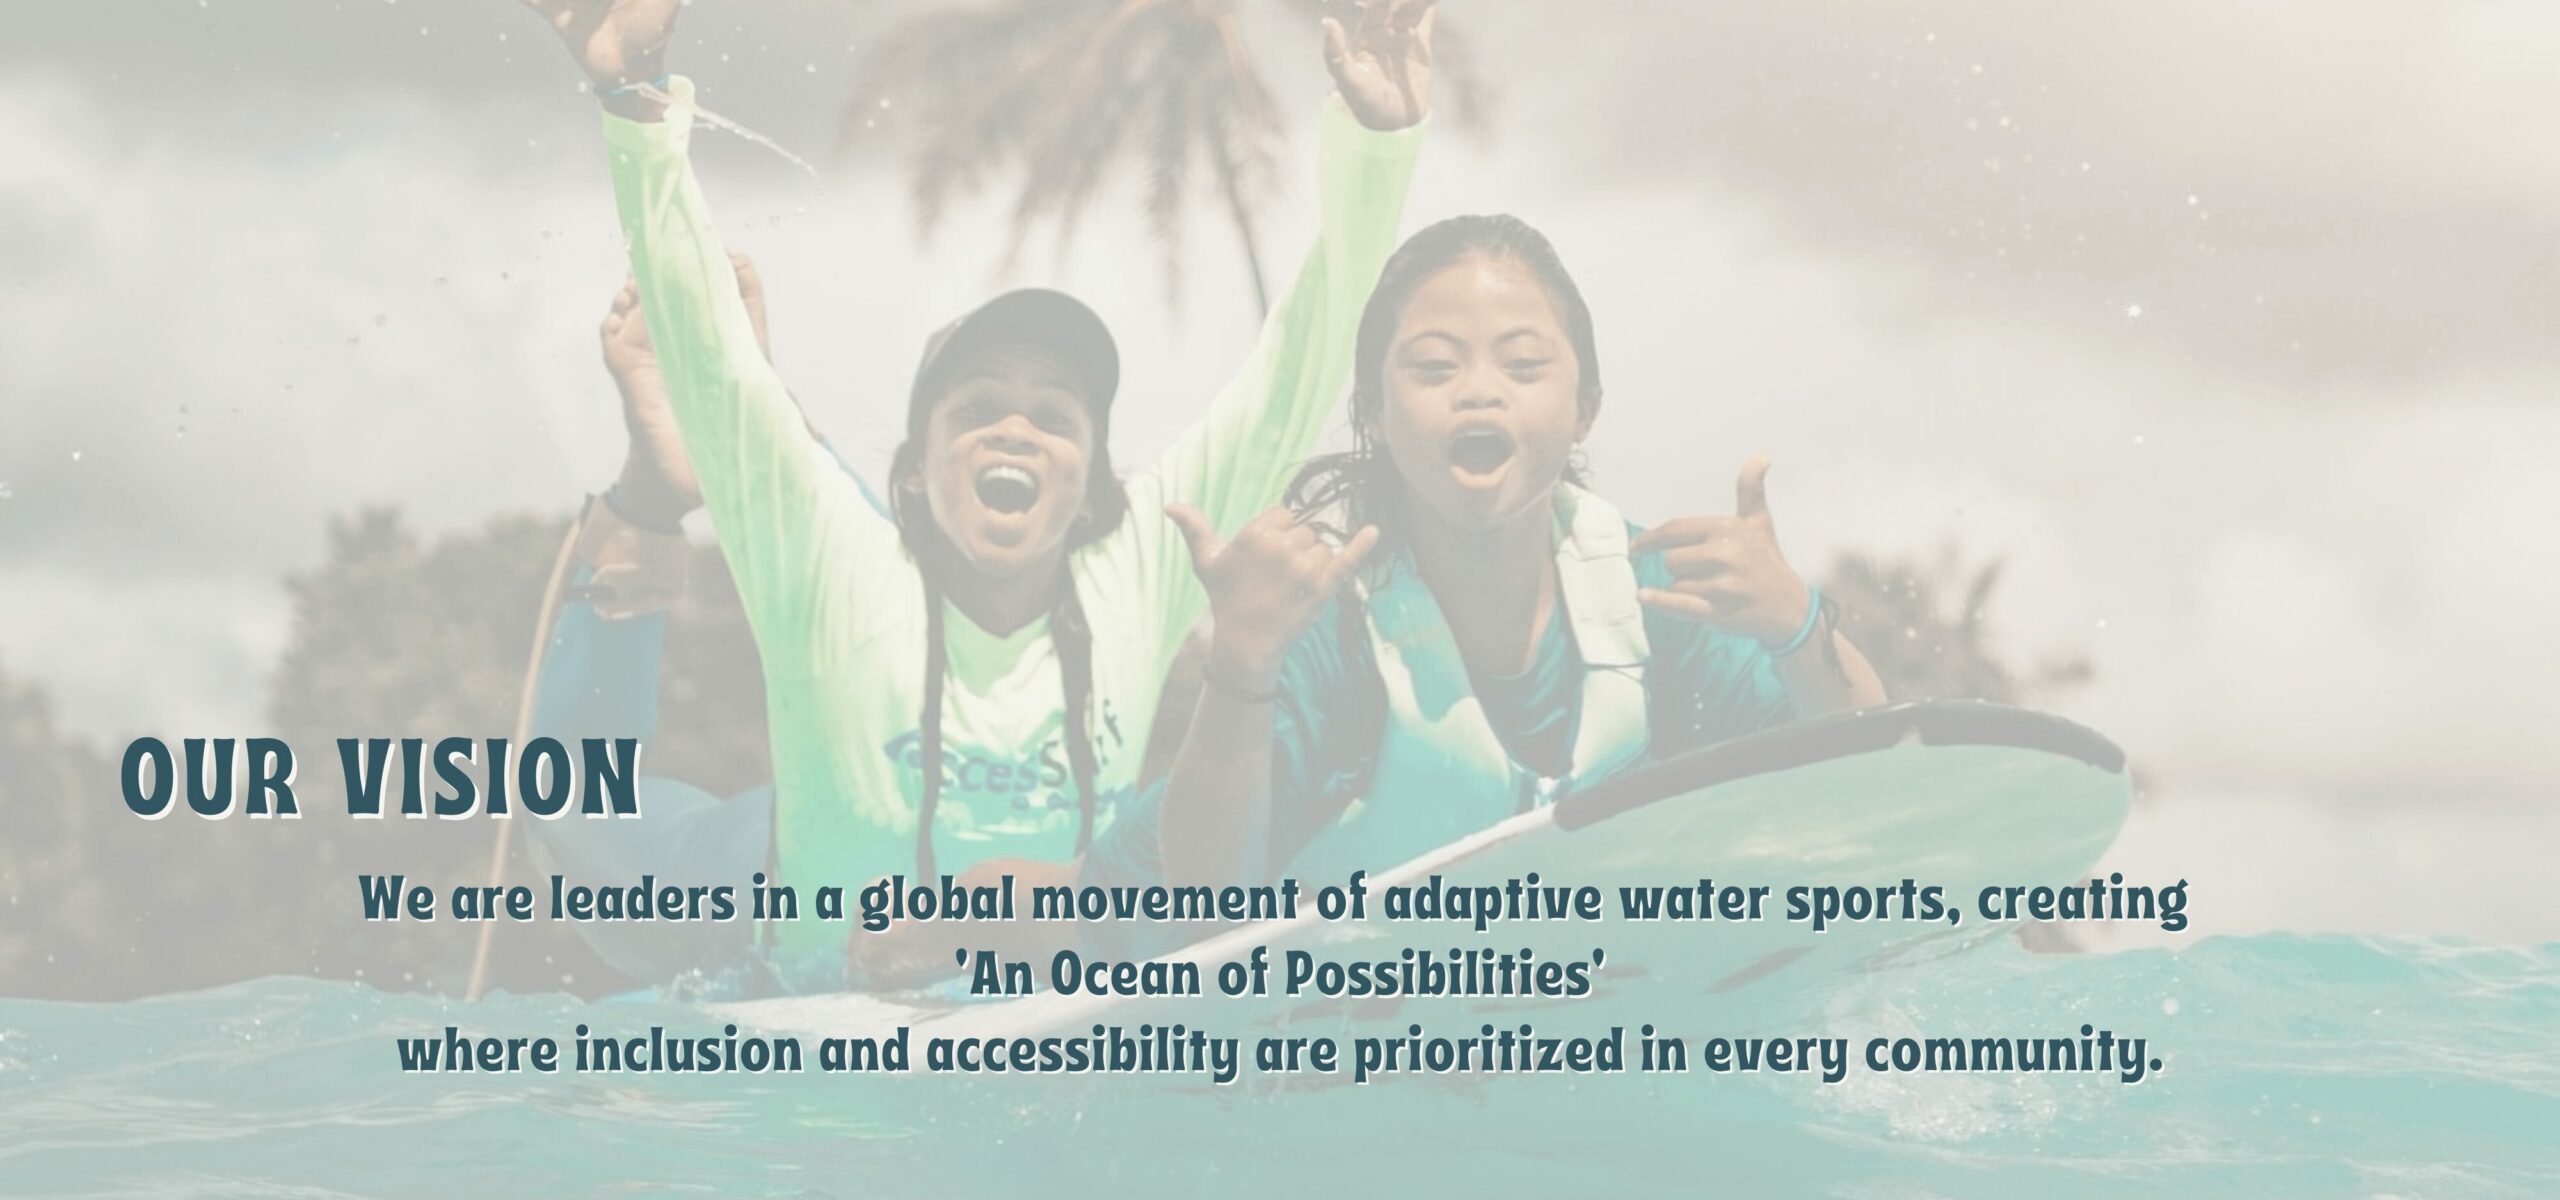 Our Vision: We are leaders in a global movement of adaptive water sport, creating 'An Ocean of Possibilities' where inclusion and accessibility are prioritized in ever community.